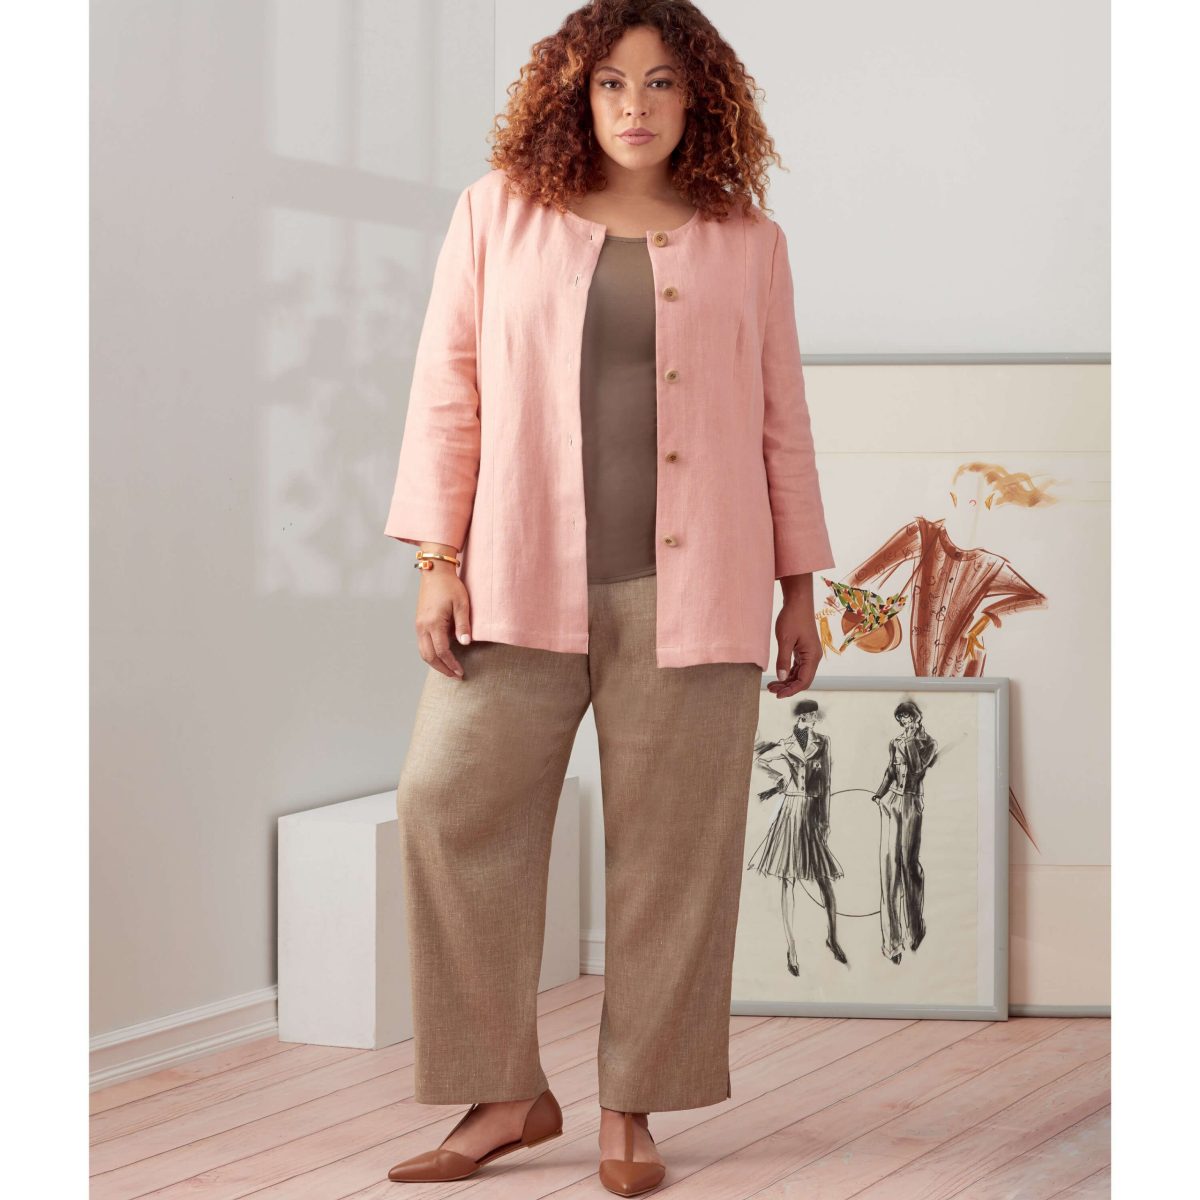 Simplicity Sewing Pattern S9269 Women's Jacket, Top and Trousers